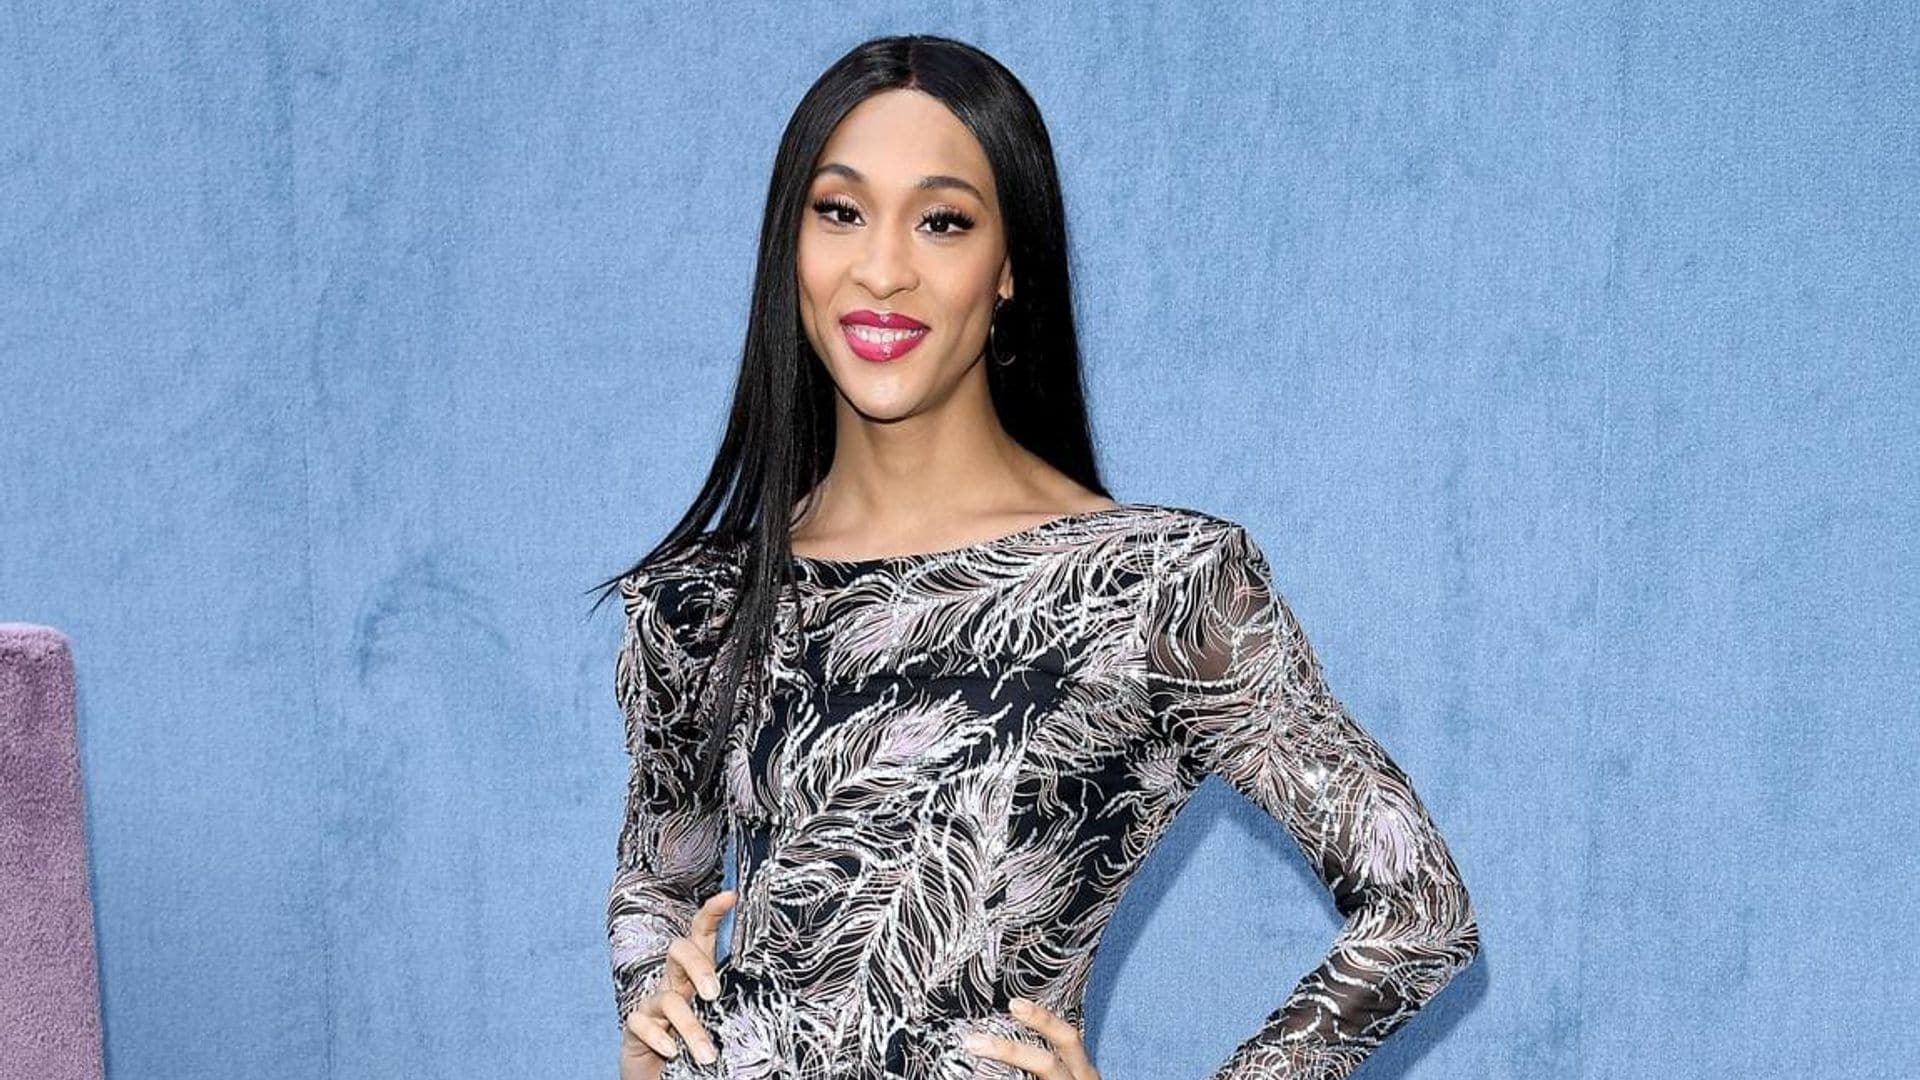 ‘Pose’ star Mj Rodriguez talks to us about taking the Coronavirus pandemic seriously and the 'blessing' helping her cope